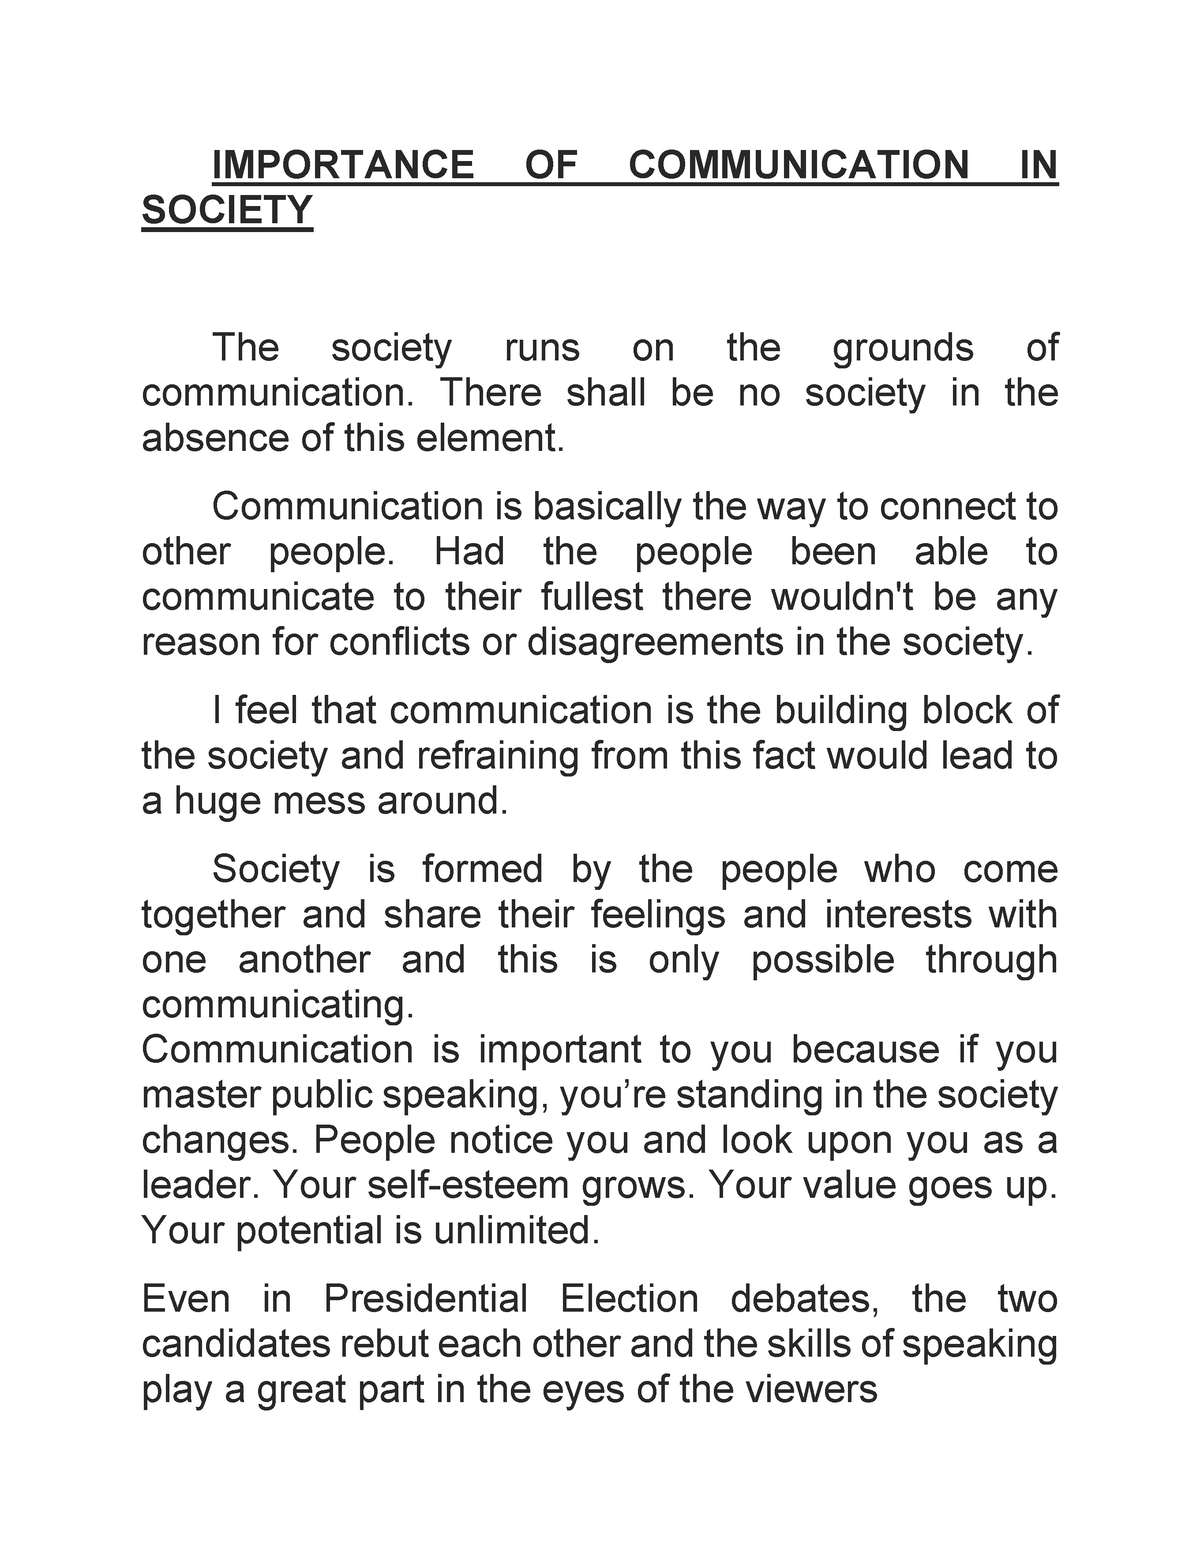 why communication is important to society essay